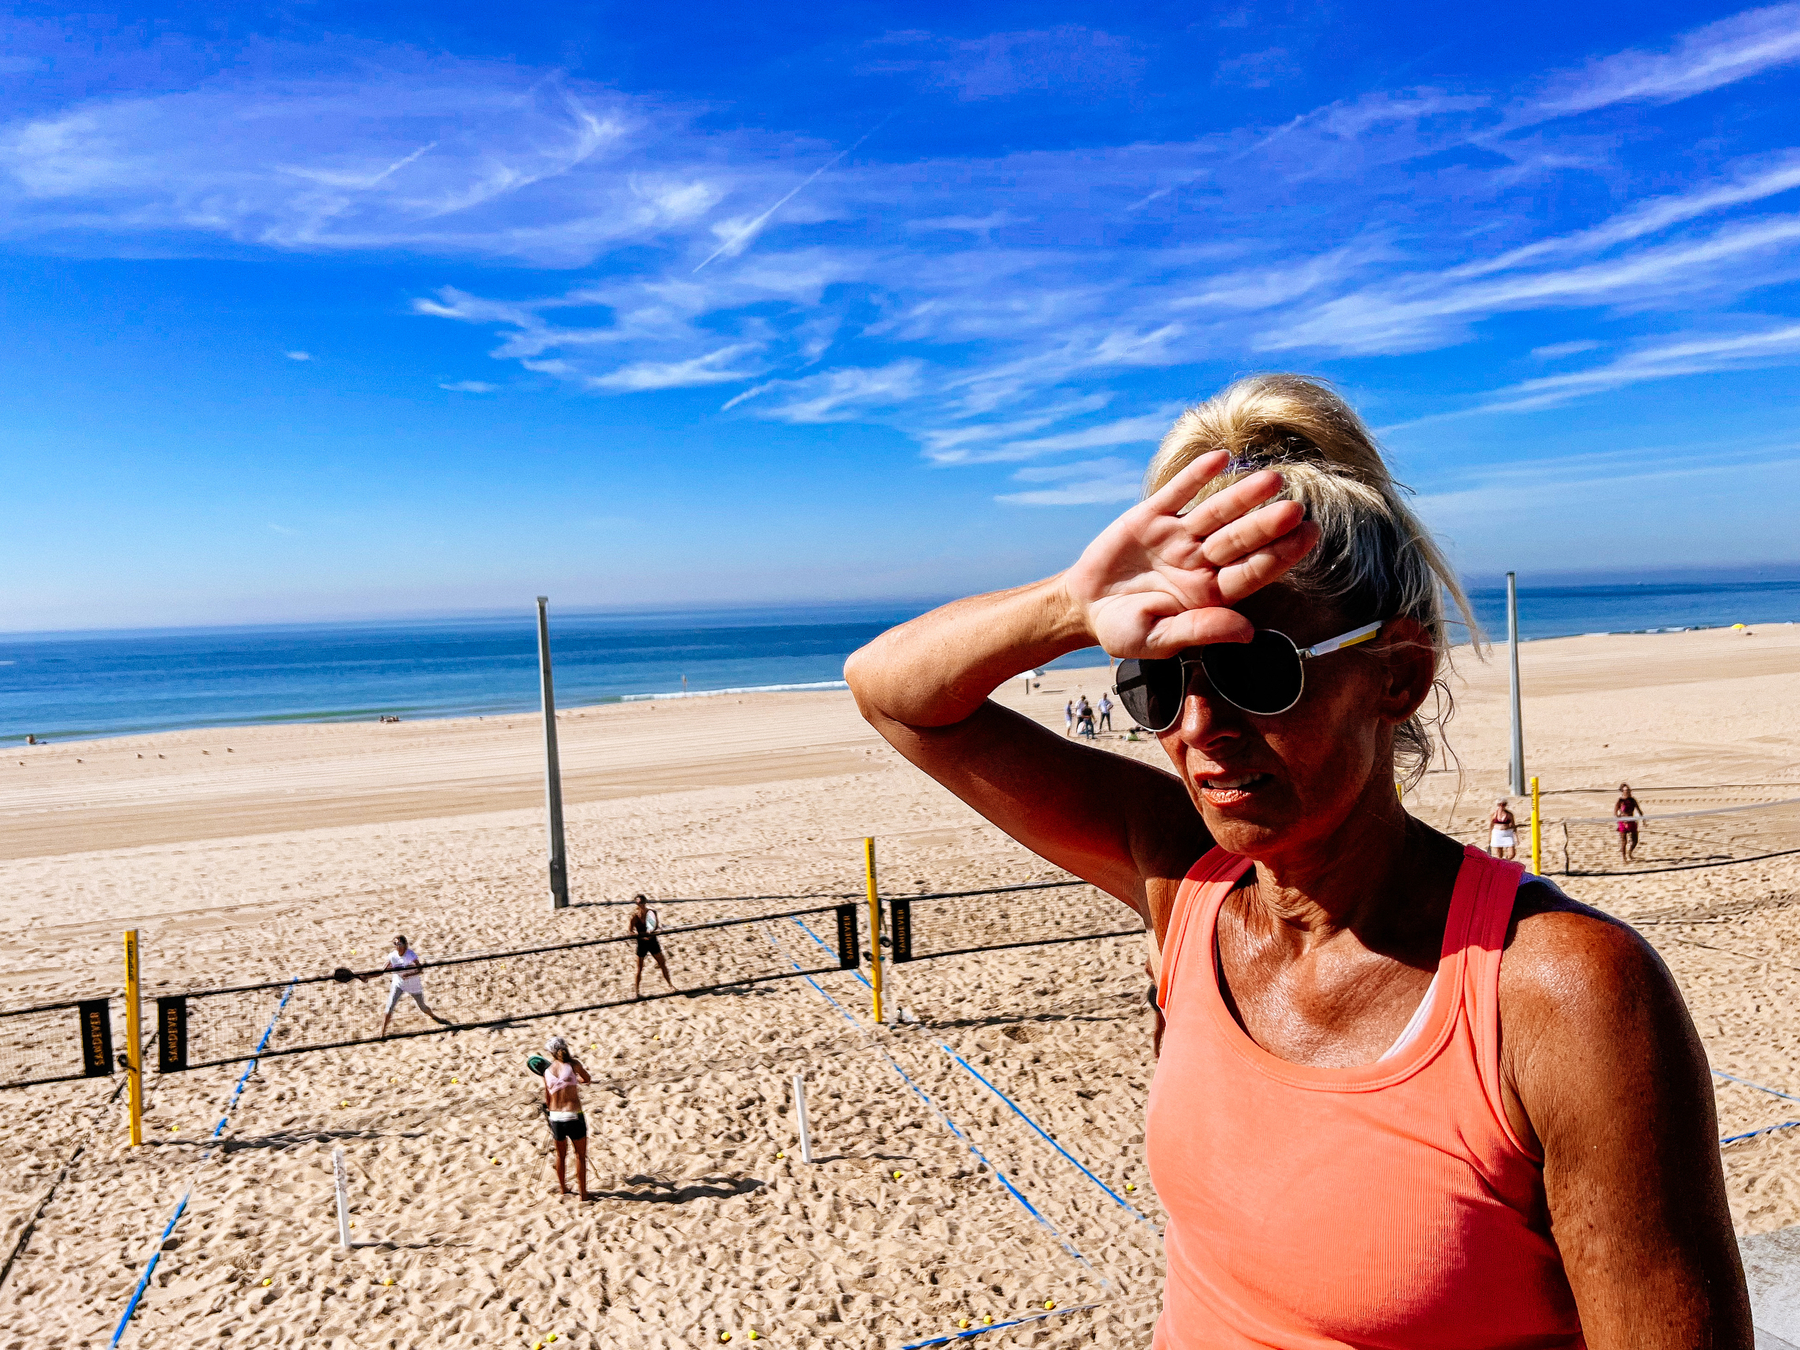 A woman shields her eyes at the beach